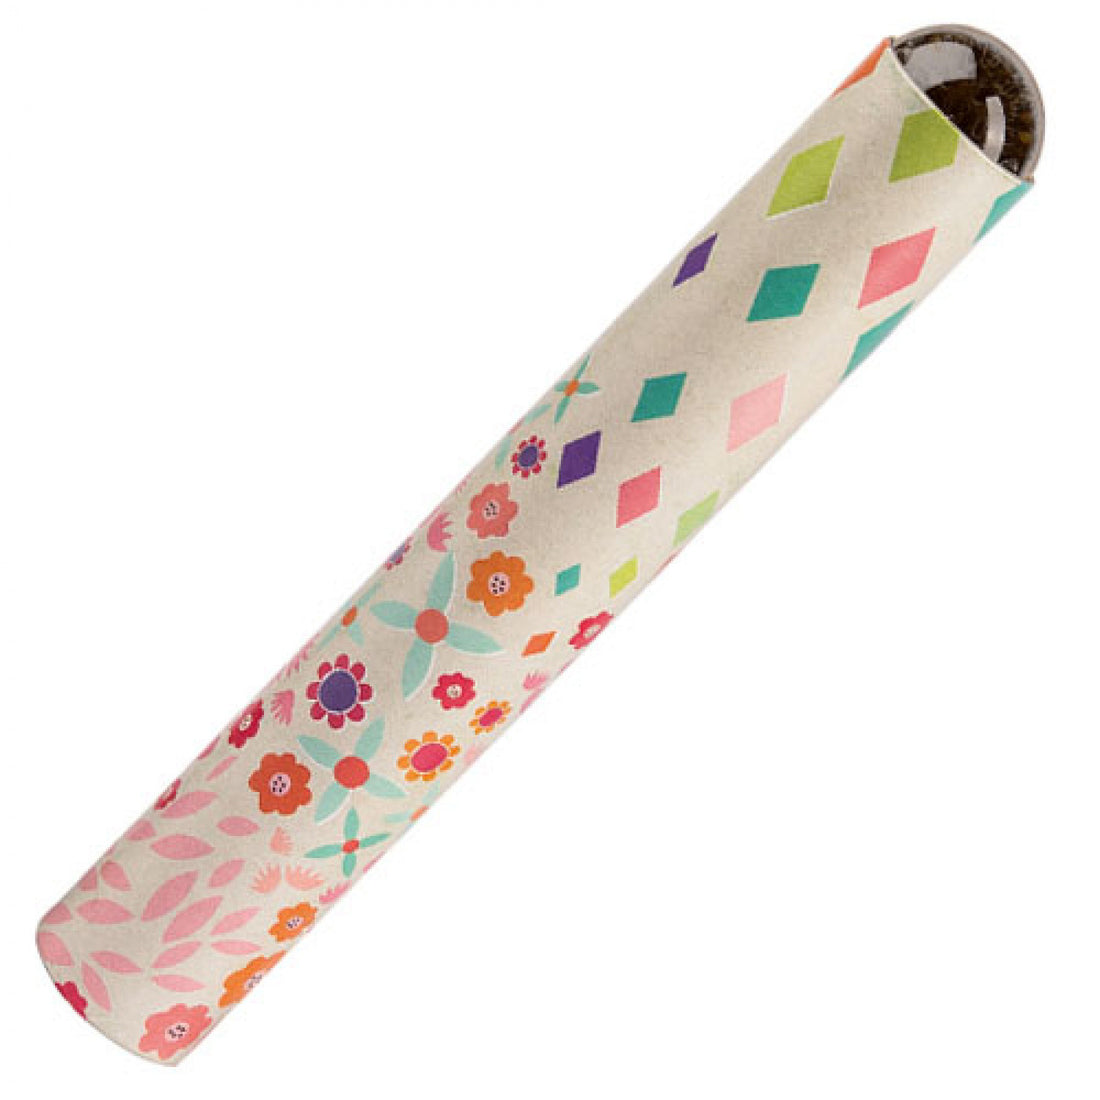 moulin-roty-red-floral-kaleidoscope-play-games-kaleidoscope-kid-moul-711054-01